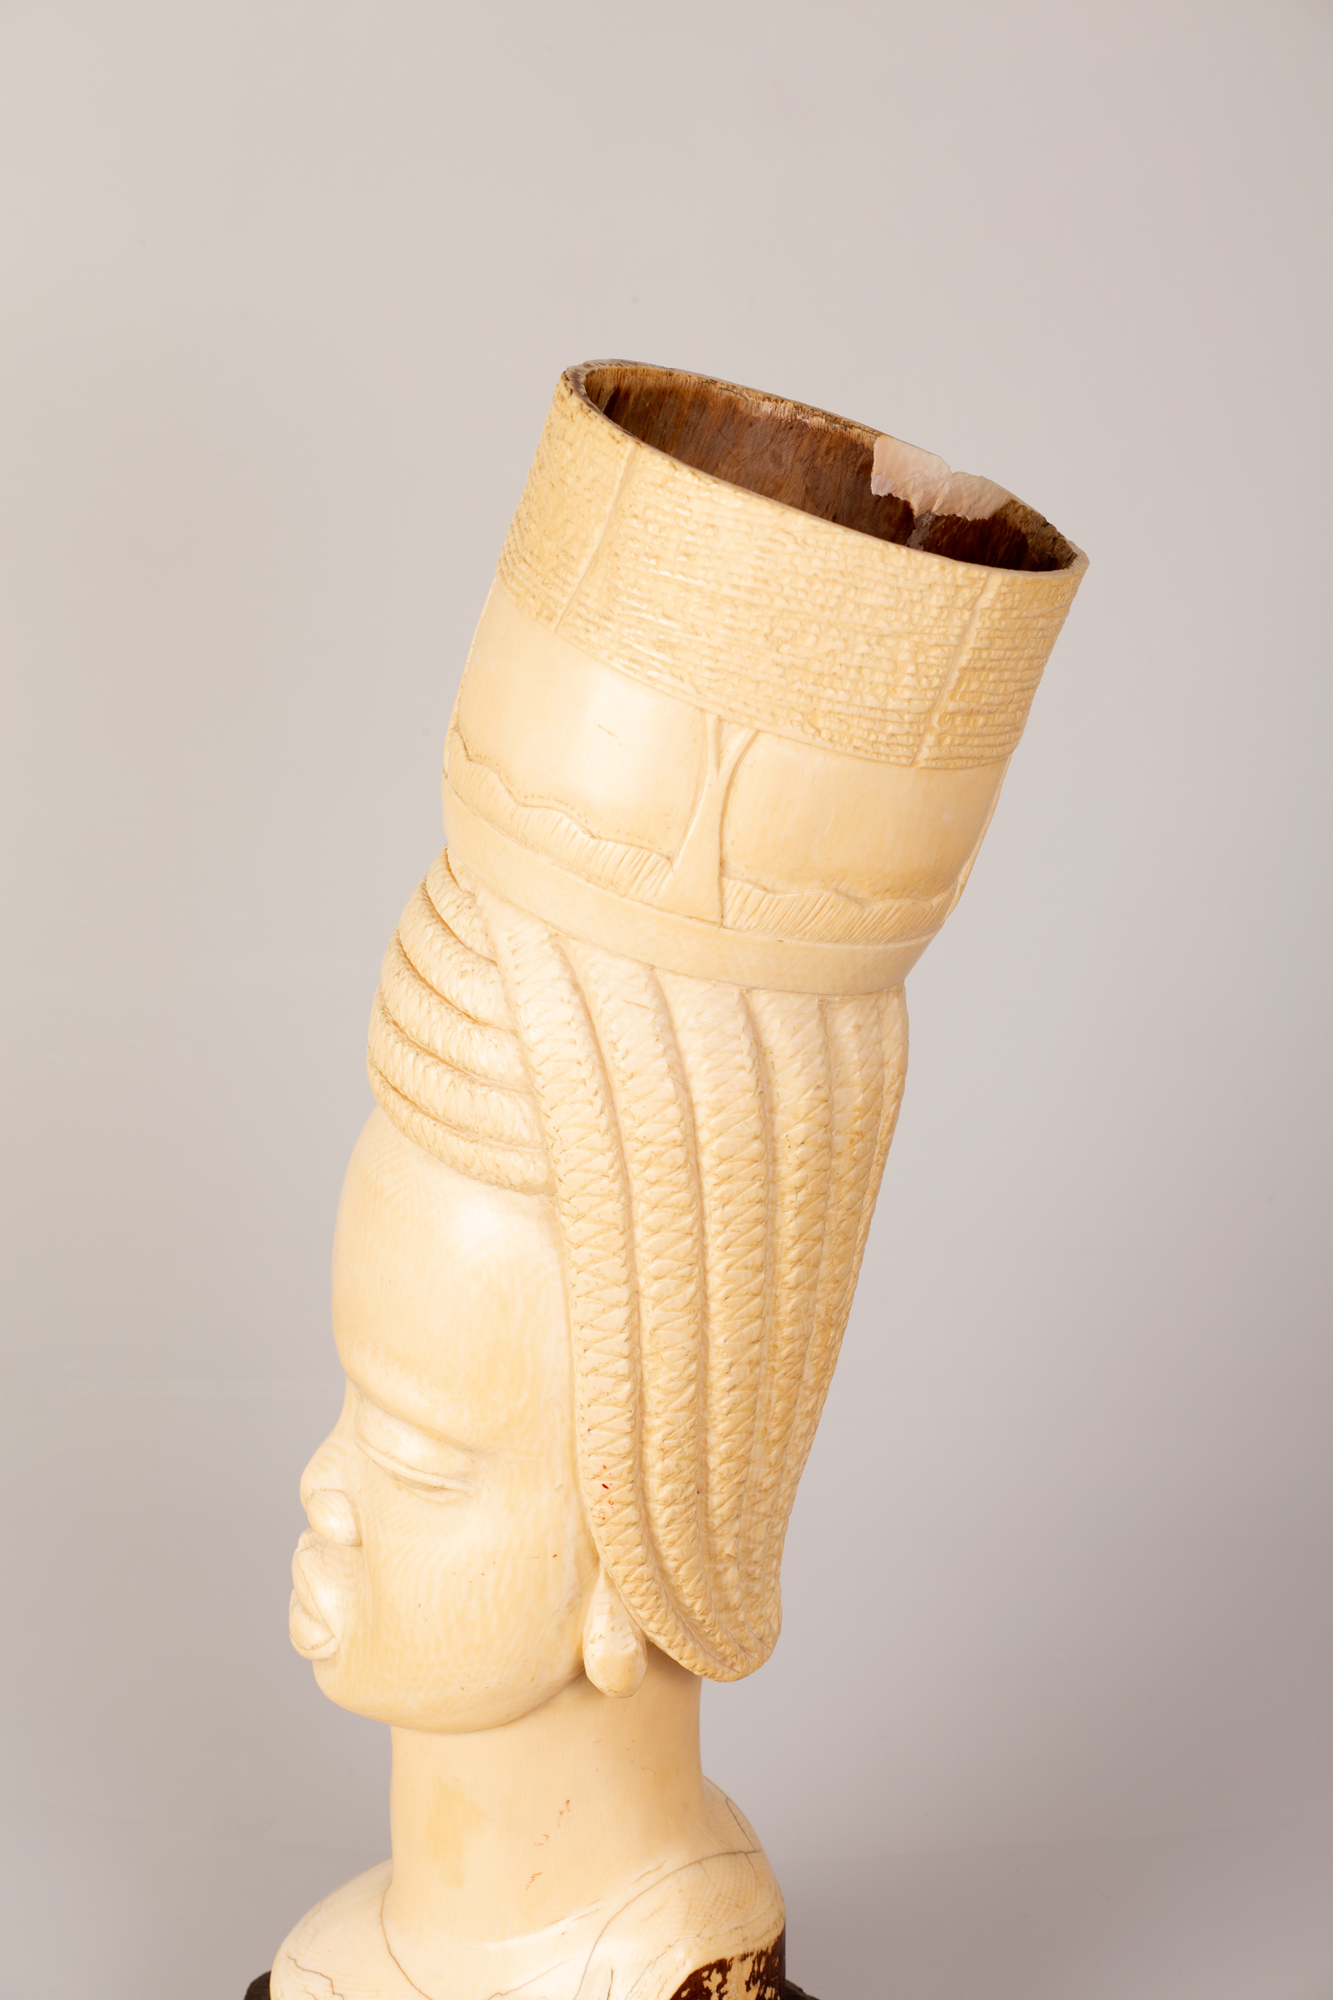 Large Sized Hollow African Bone Tusk Girl Figure on Wooden Stand - Image 3 of 4